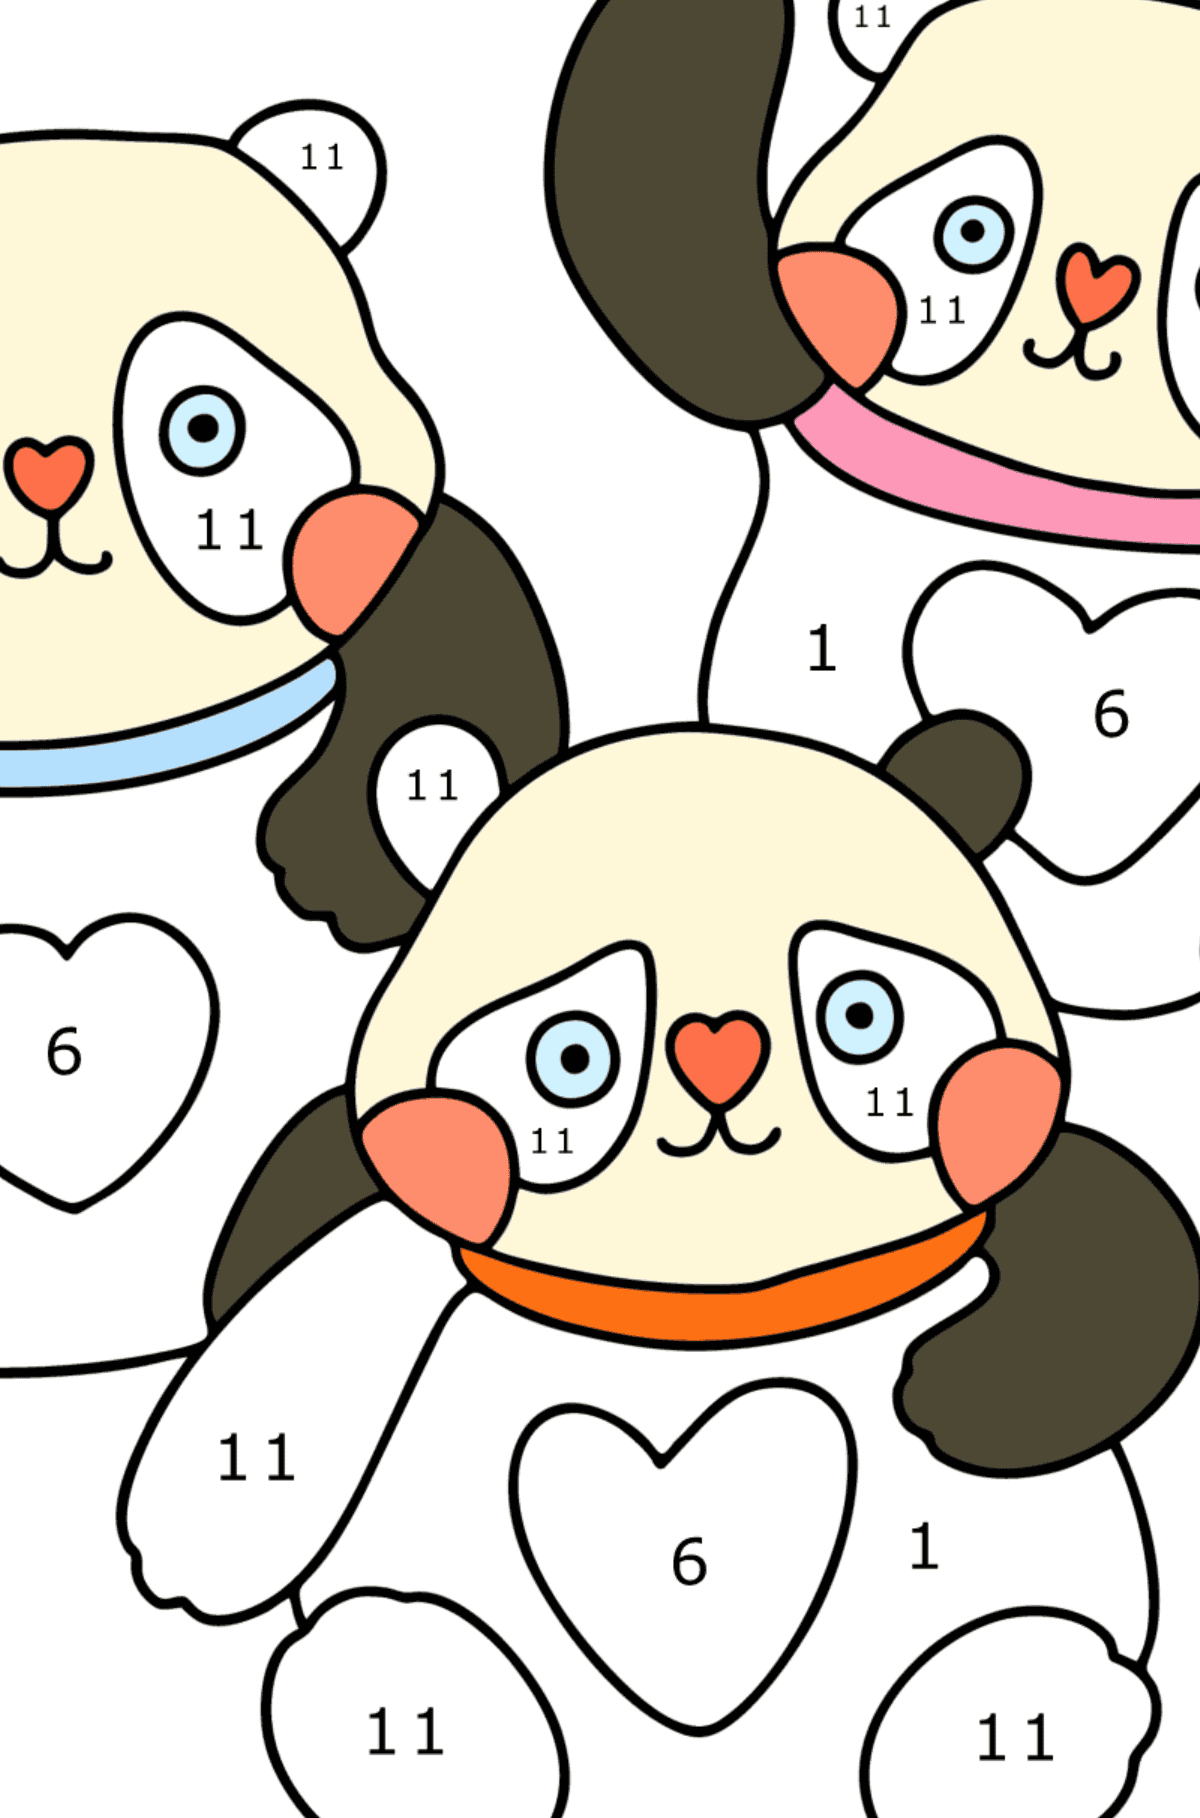 Kawaii pandas coloring page - Coloring by Numbers for Kids